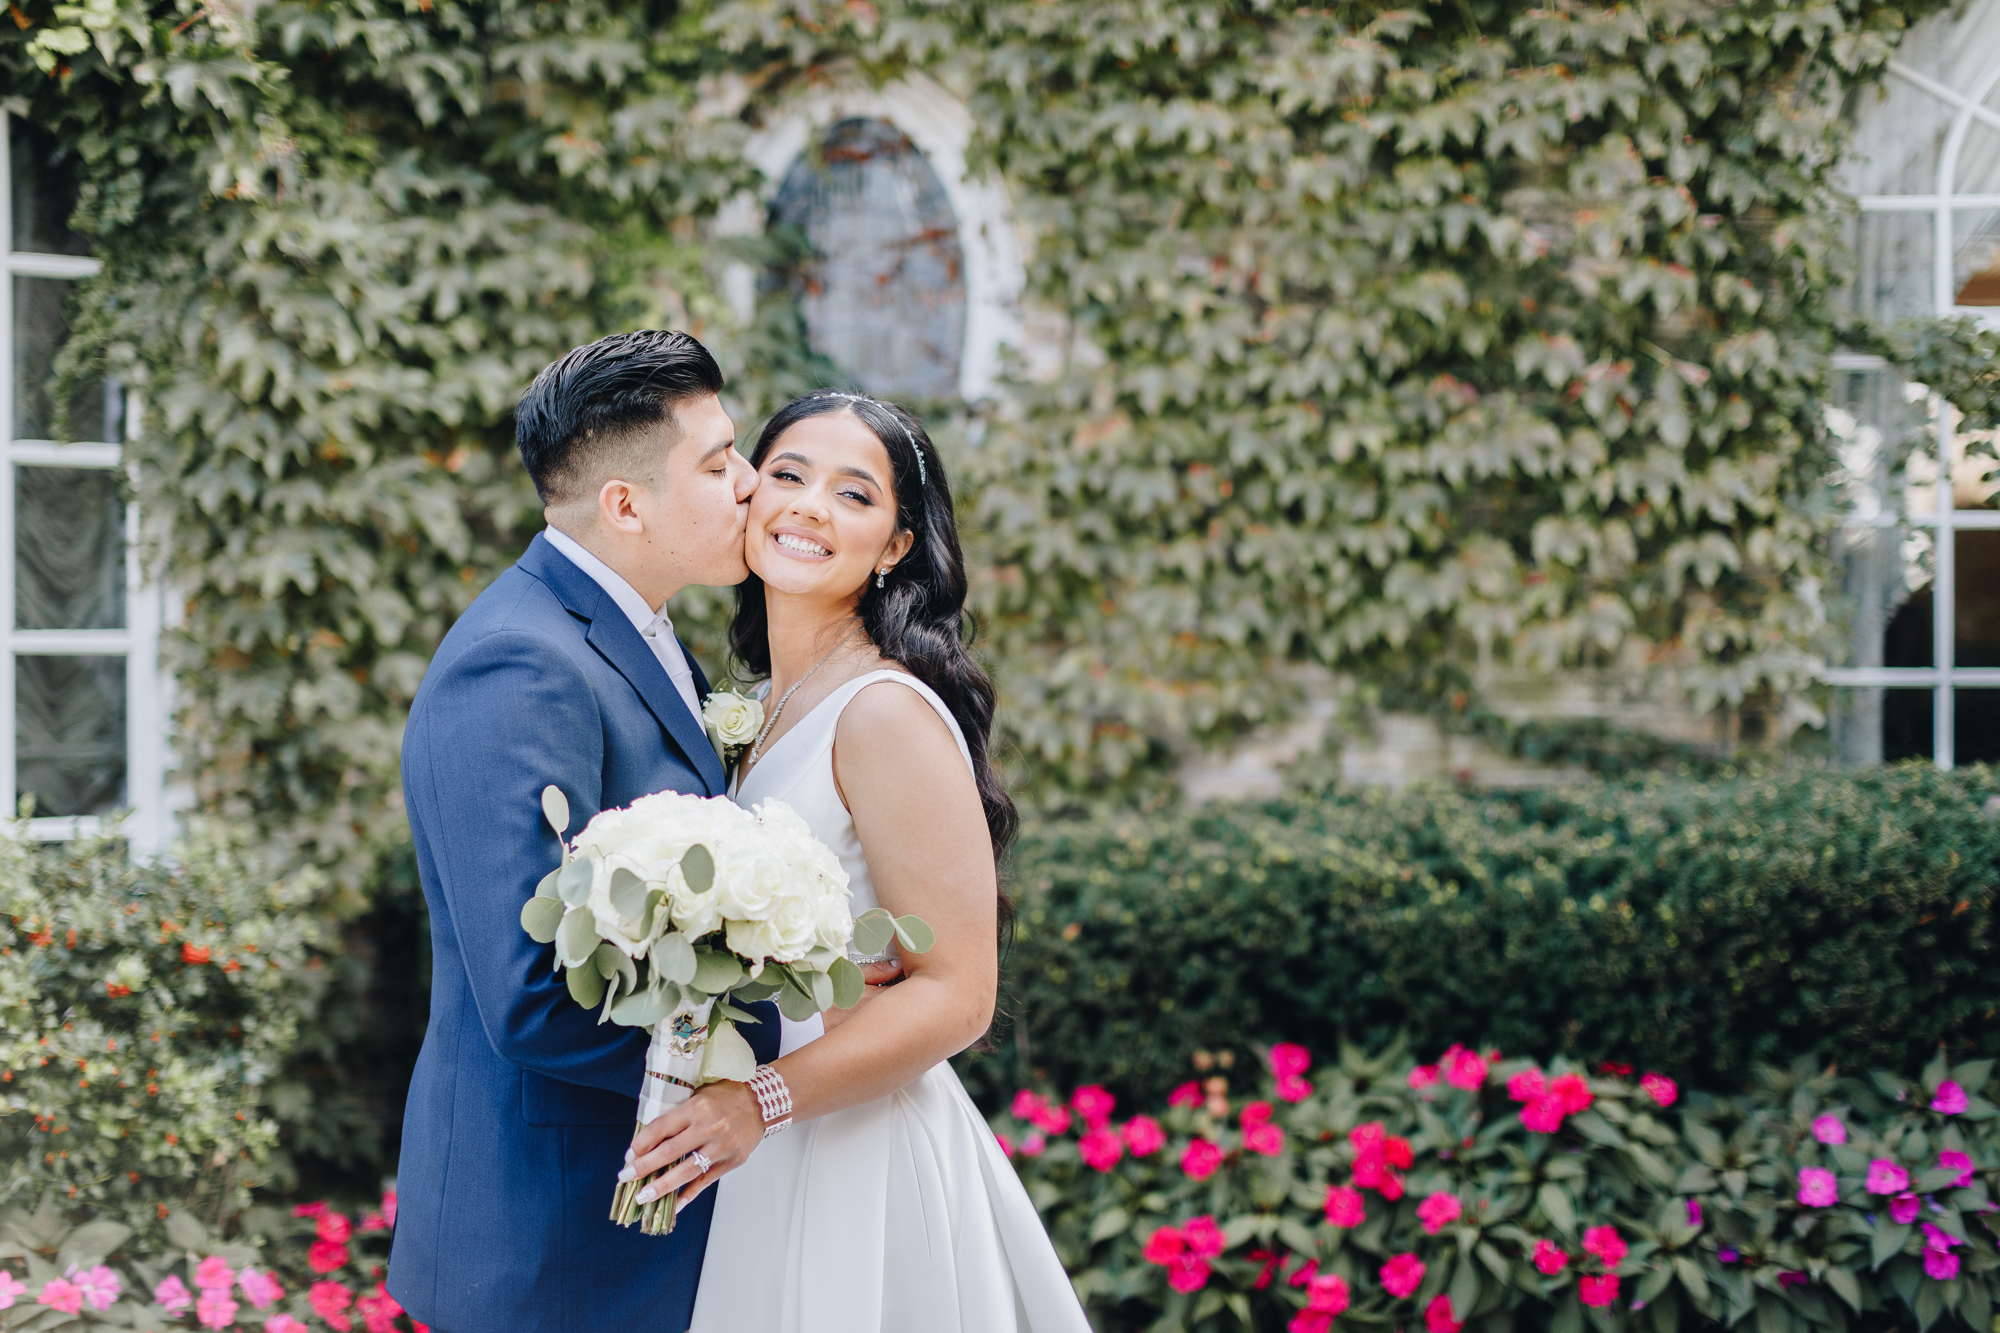 Romantic wedding photos at the Brownstone in NJ